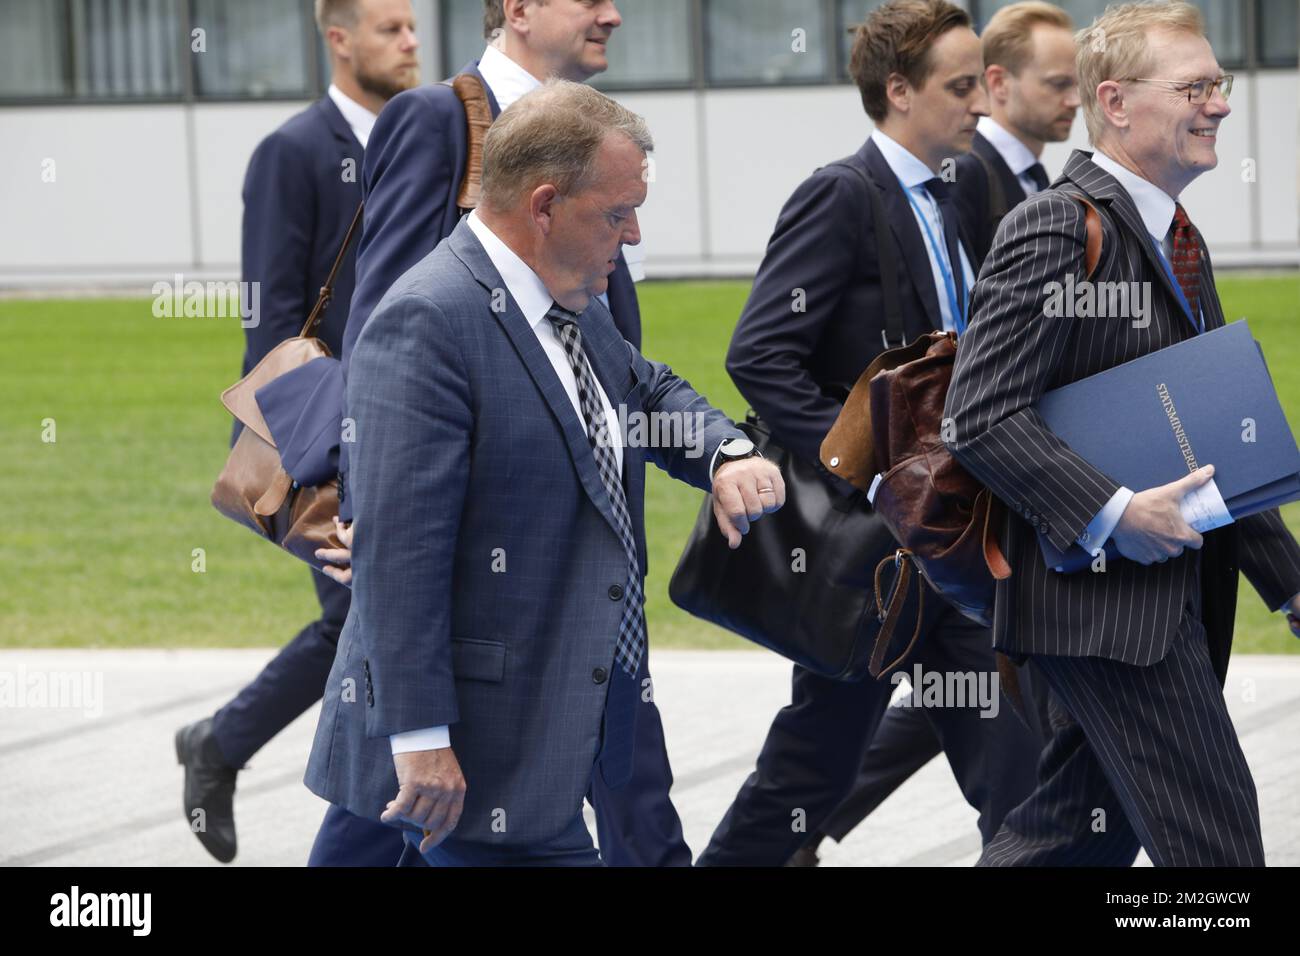 Denmark Prime Minister Lars Lokke Rasmussen pictured at the arrivals on day two of a summit of the NATO (North Atlantic Treaty Organization) military alliance, Thursday 12 July 2018, in Brussels. BELGA PHOTO POOL PABLO GARRIGOS CUCARELLA  Stock Photo